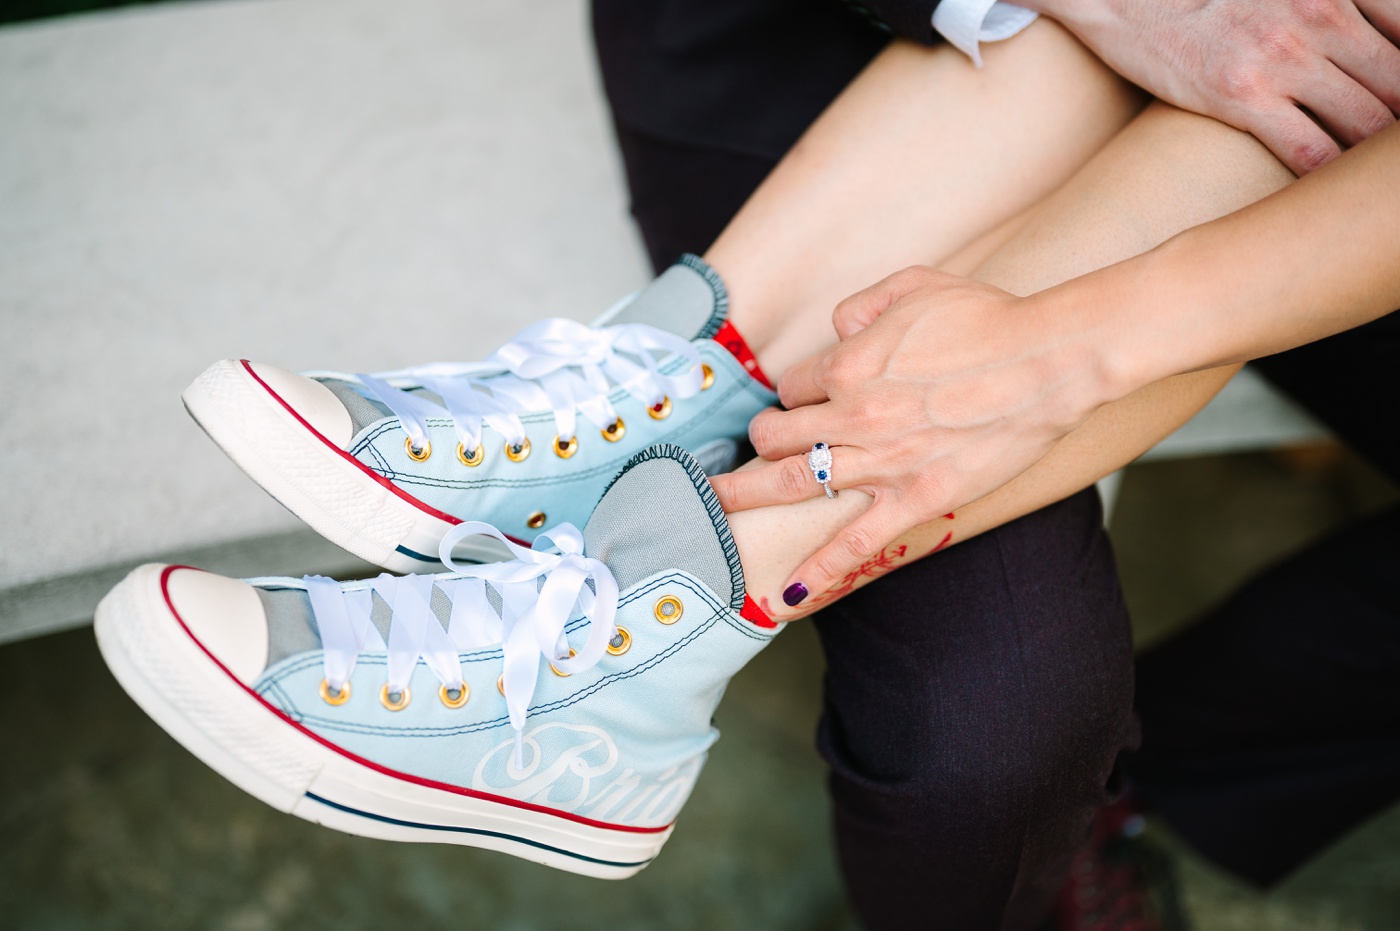 Blue custom "Bride" Converse with white satin shoelaces